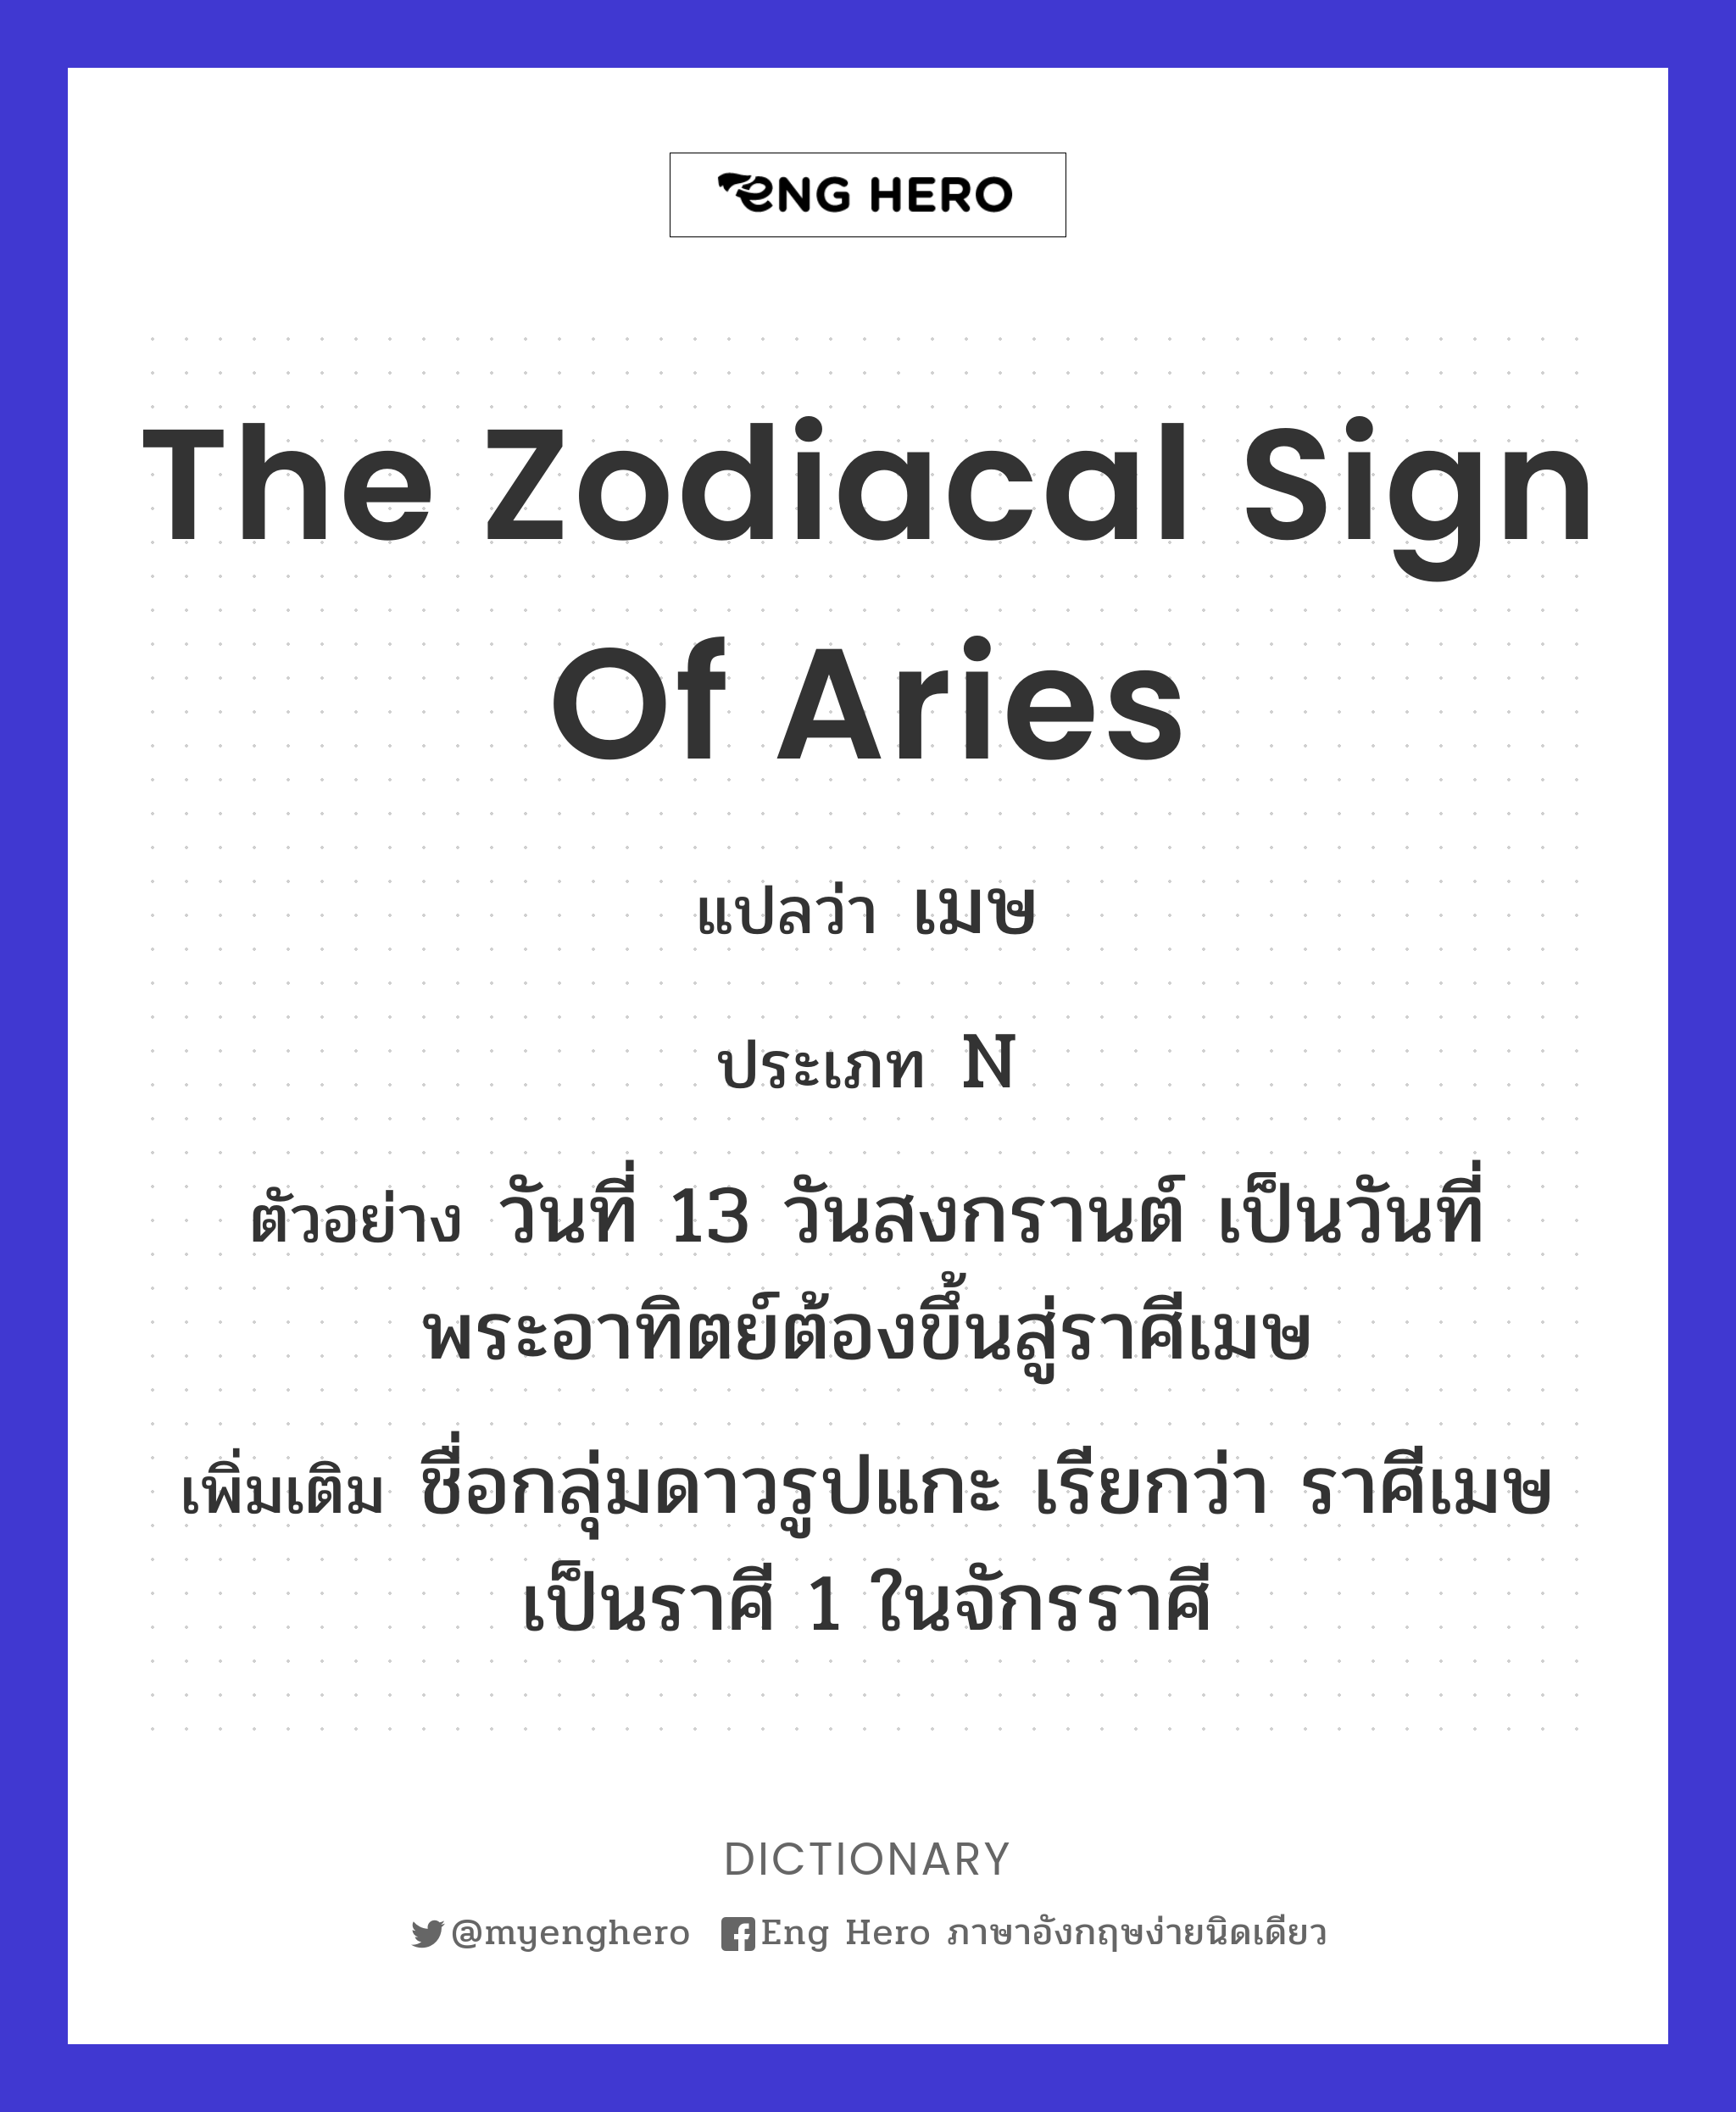 the zodiacal sign of Aries